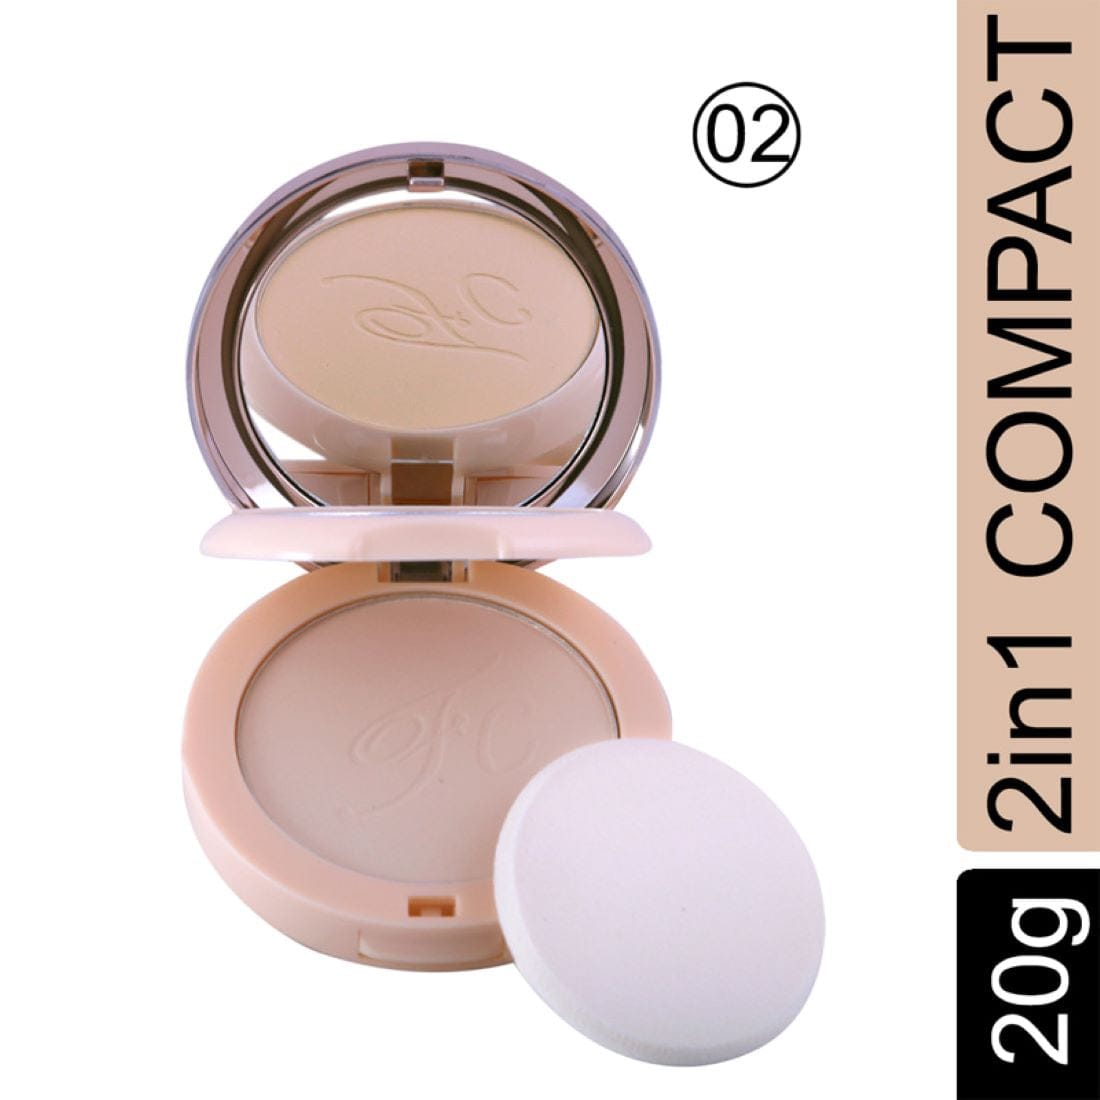 This is a new generation of oil control formulas designed to create nude makeup that is flawless natural and invisible. This two-in-one face powder sets your makeup in a nude finish without a trace of color. Two pieces of powder cake help to achieve the makeover more casually. The images represent the actual product though the color of the image and product may slightly differ. Long-Lasting, Dermatology approved